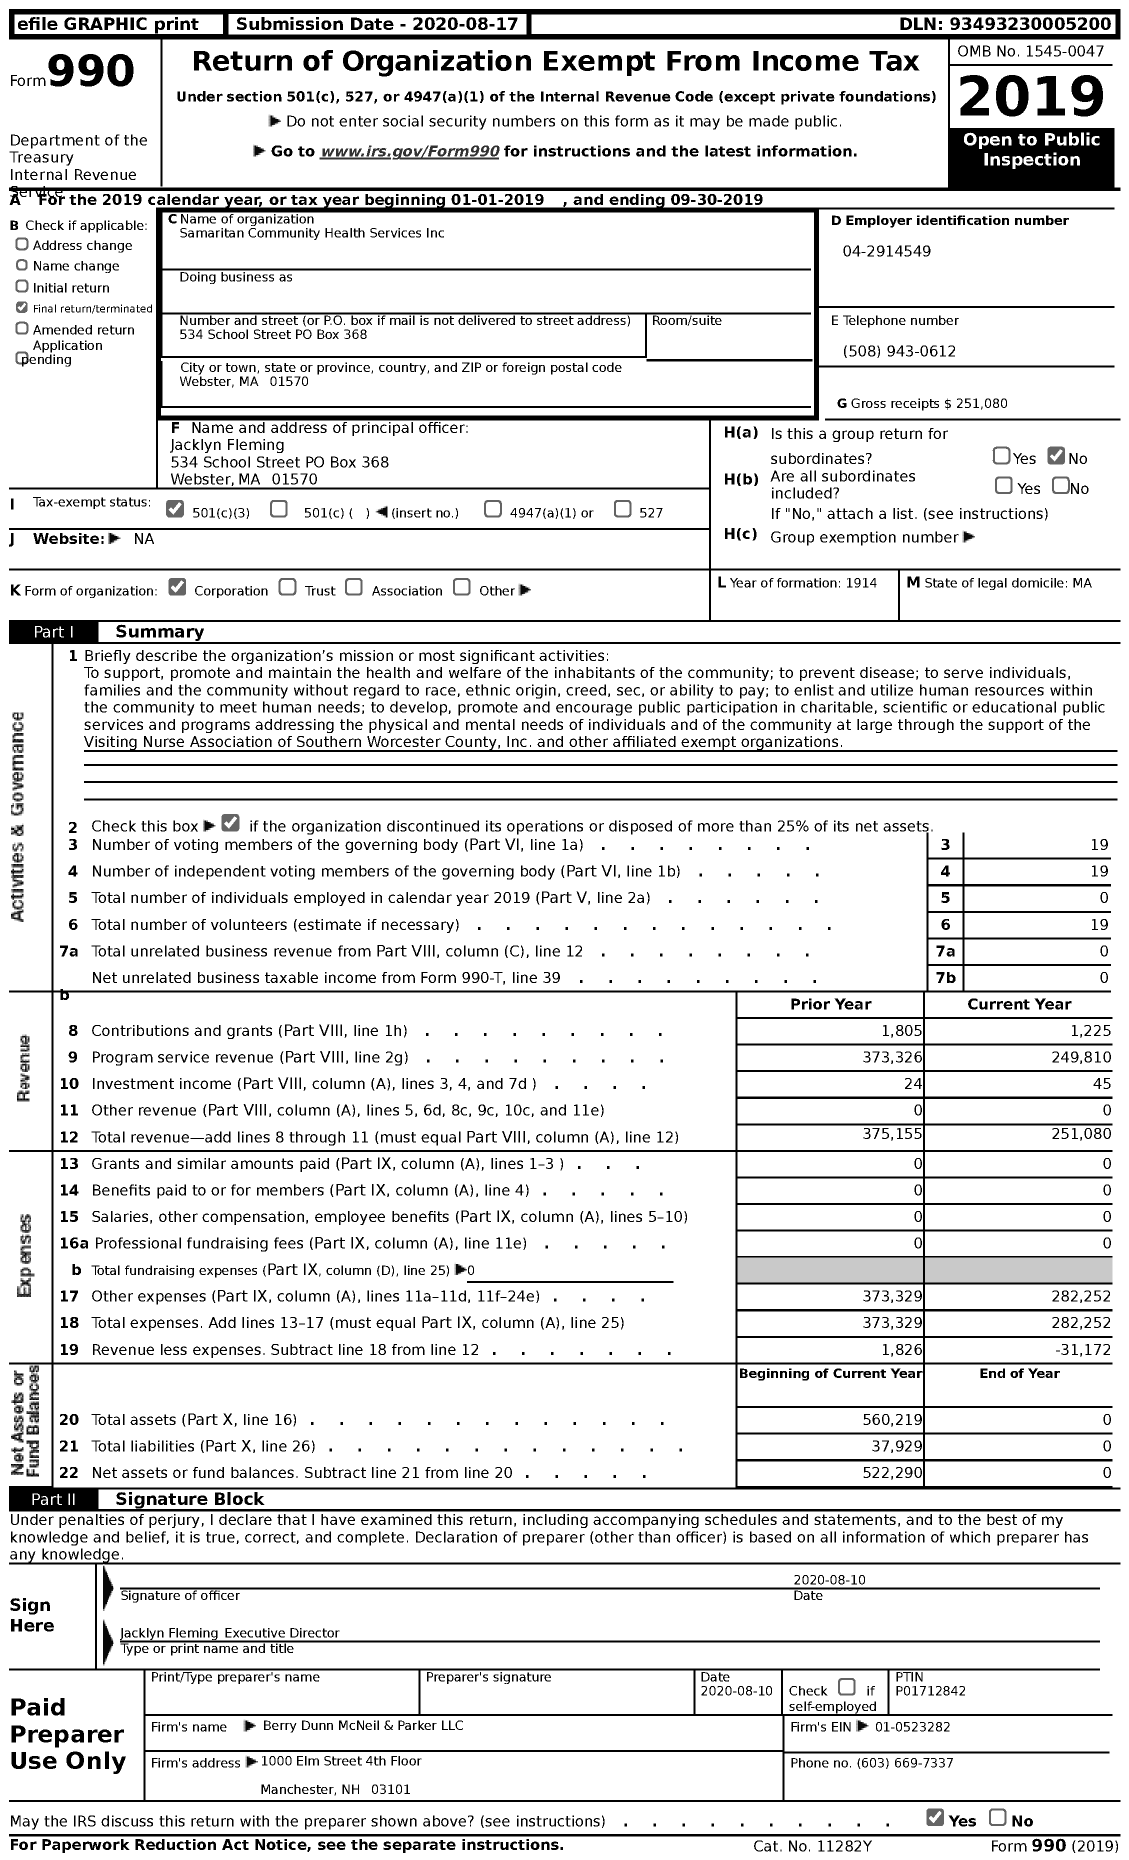 Image of first page of 2018 Form 990 for Samaritan Community Health Services